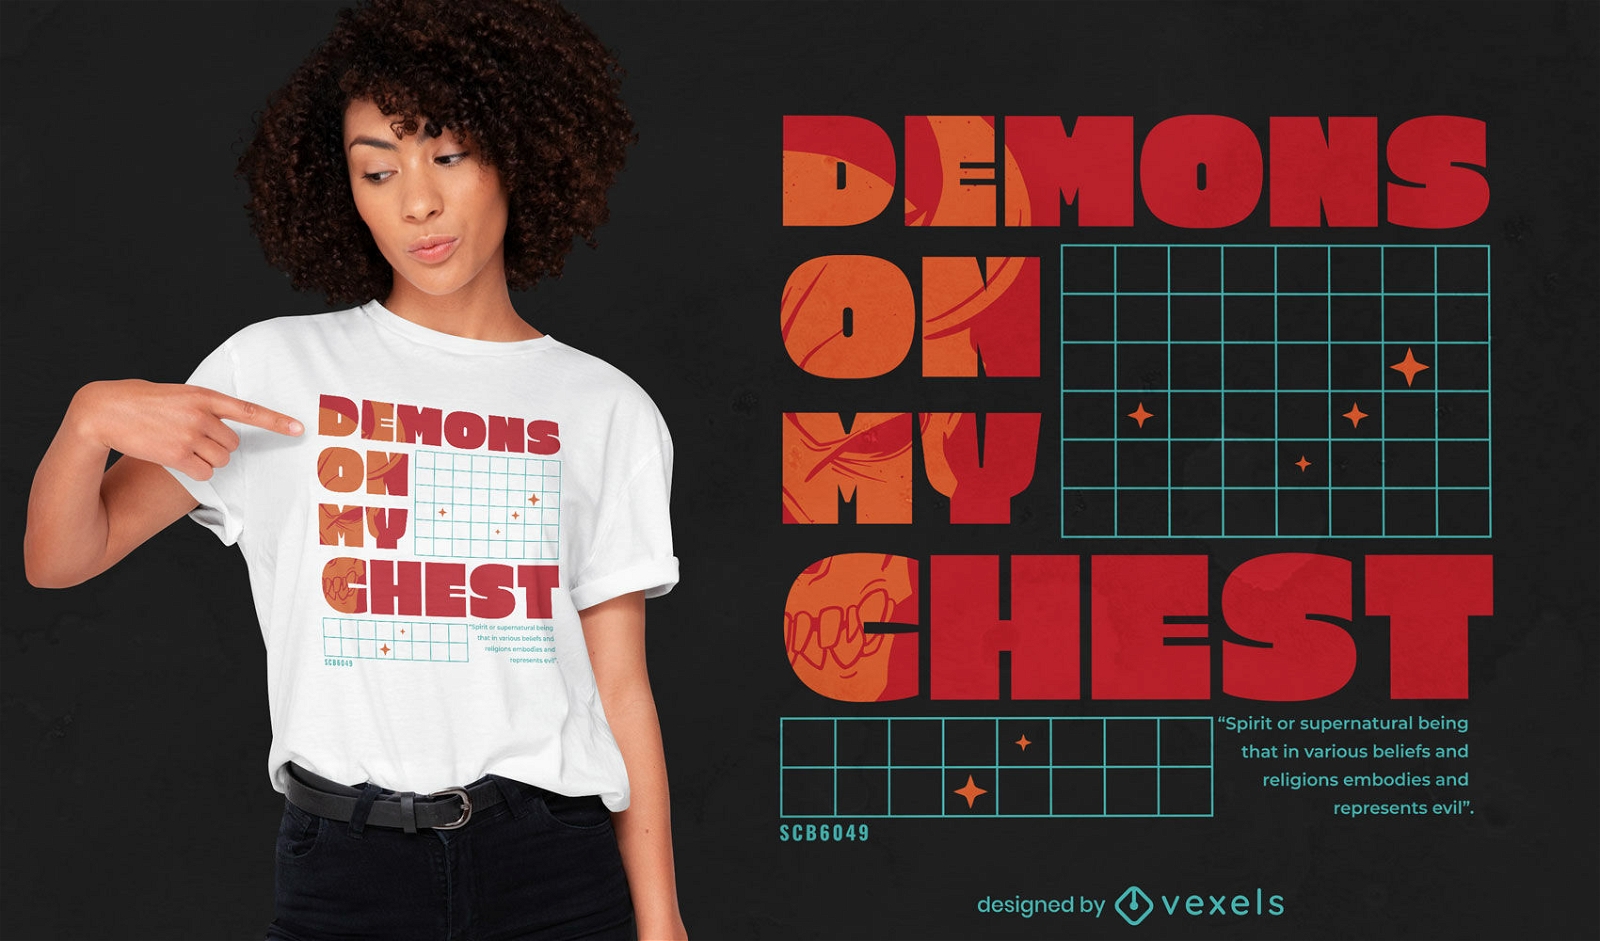 Cool demons quote t-shirt design